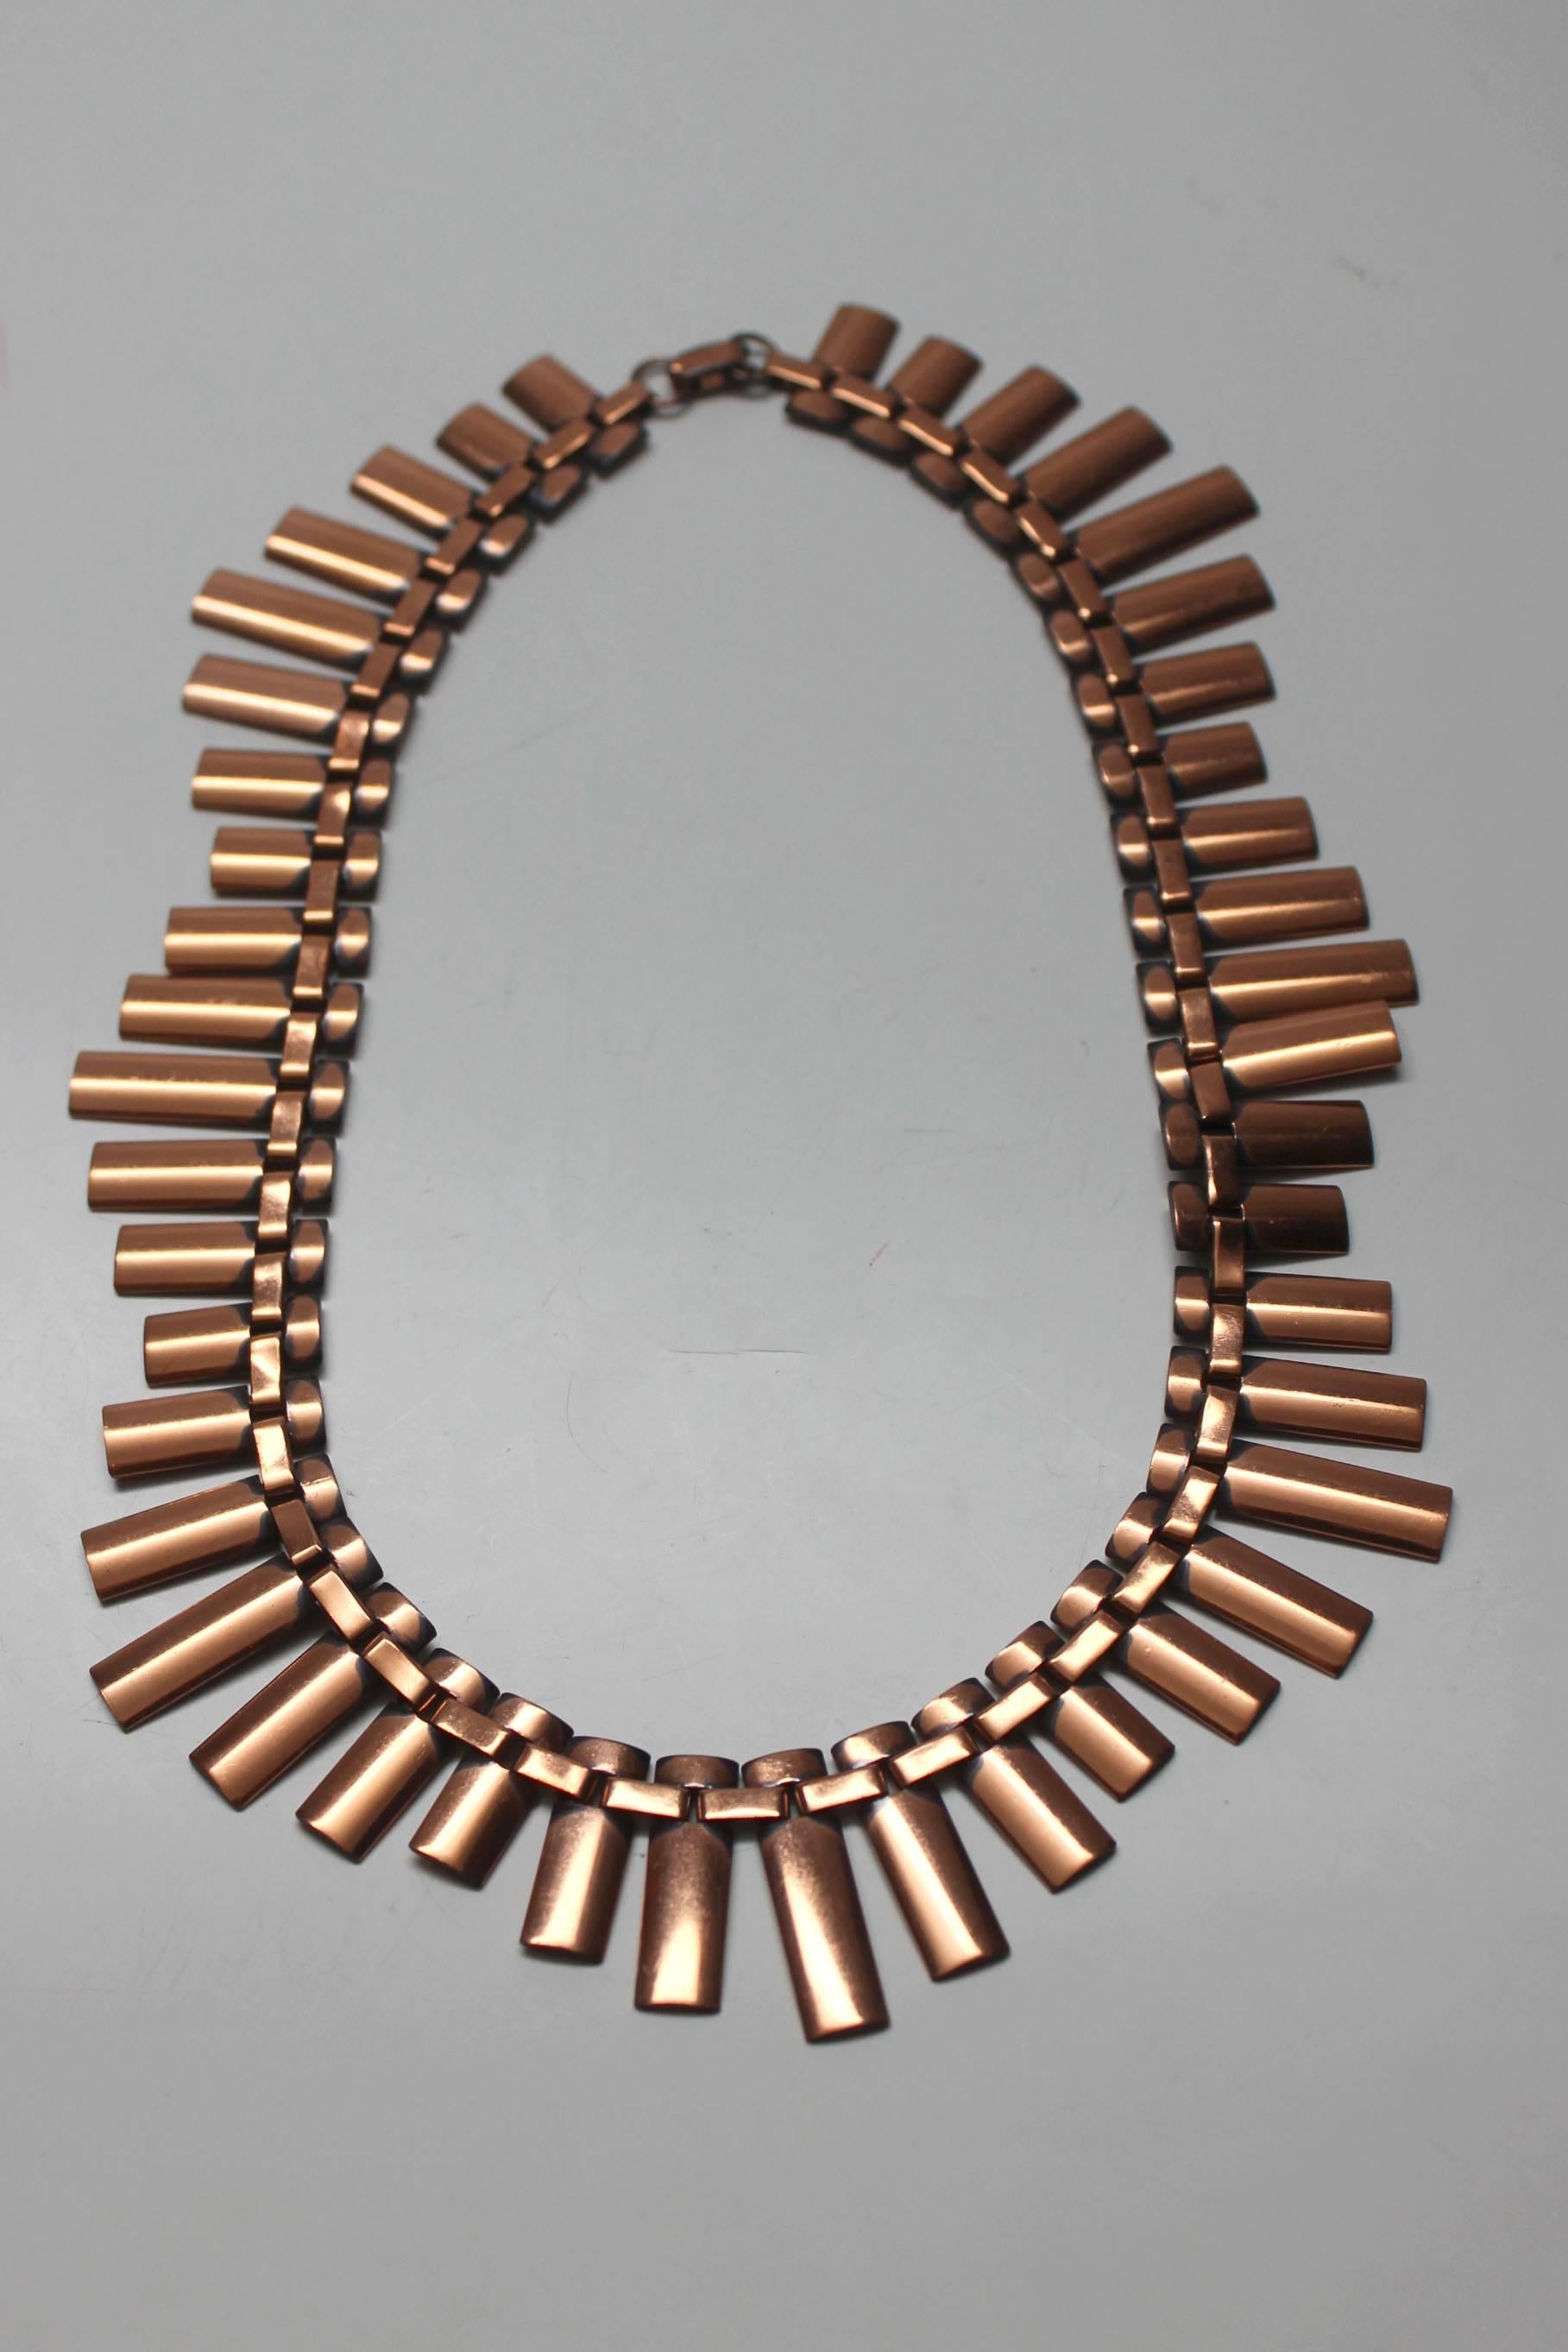 This 1950's copper choker is beautifully designed. It has vertical discs of various sizes threaded onto a copper link chain. It is a very chic piece in a 1950s modernist style when copper jewelry was all the rage. The clasp is signed Renoir, the